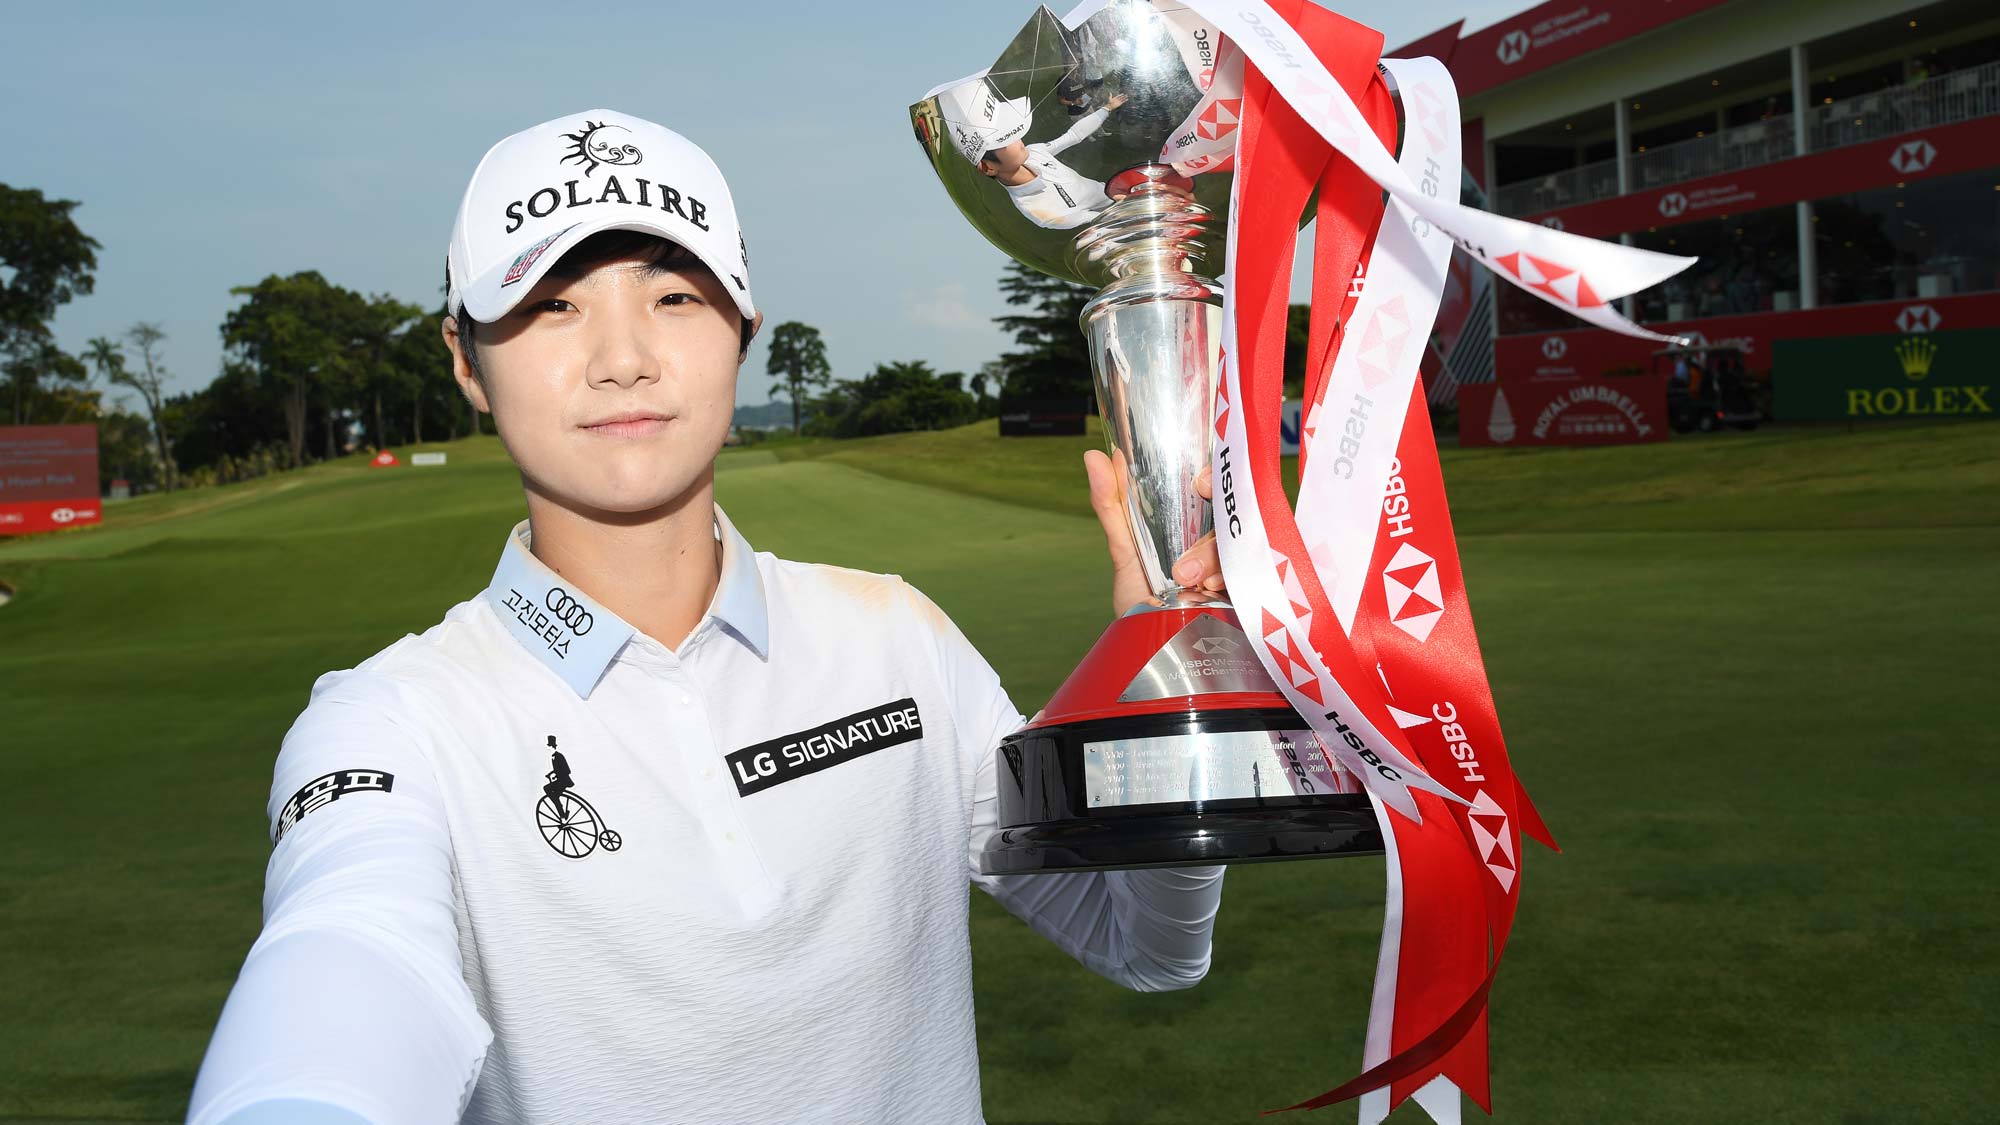 Sung Hyun Park has her #BagsPacked for the 2020 Diamond Resorts Tournament of Champions after her victory at the 2019 HSBC Women's World Championship